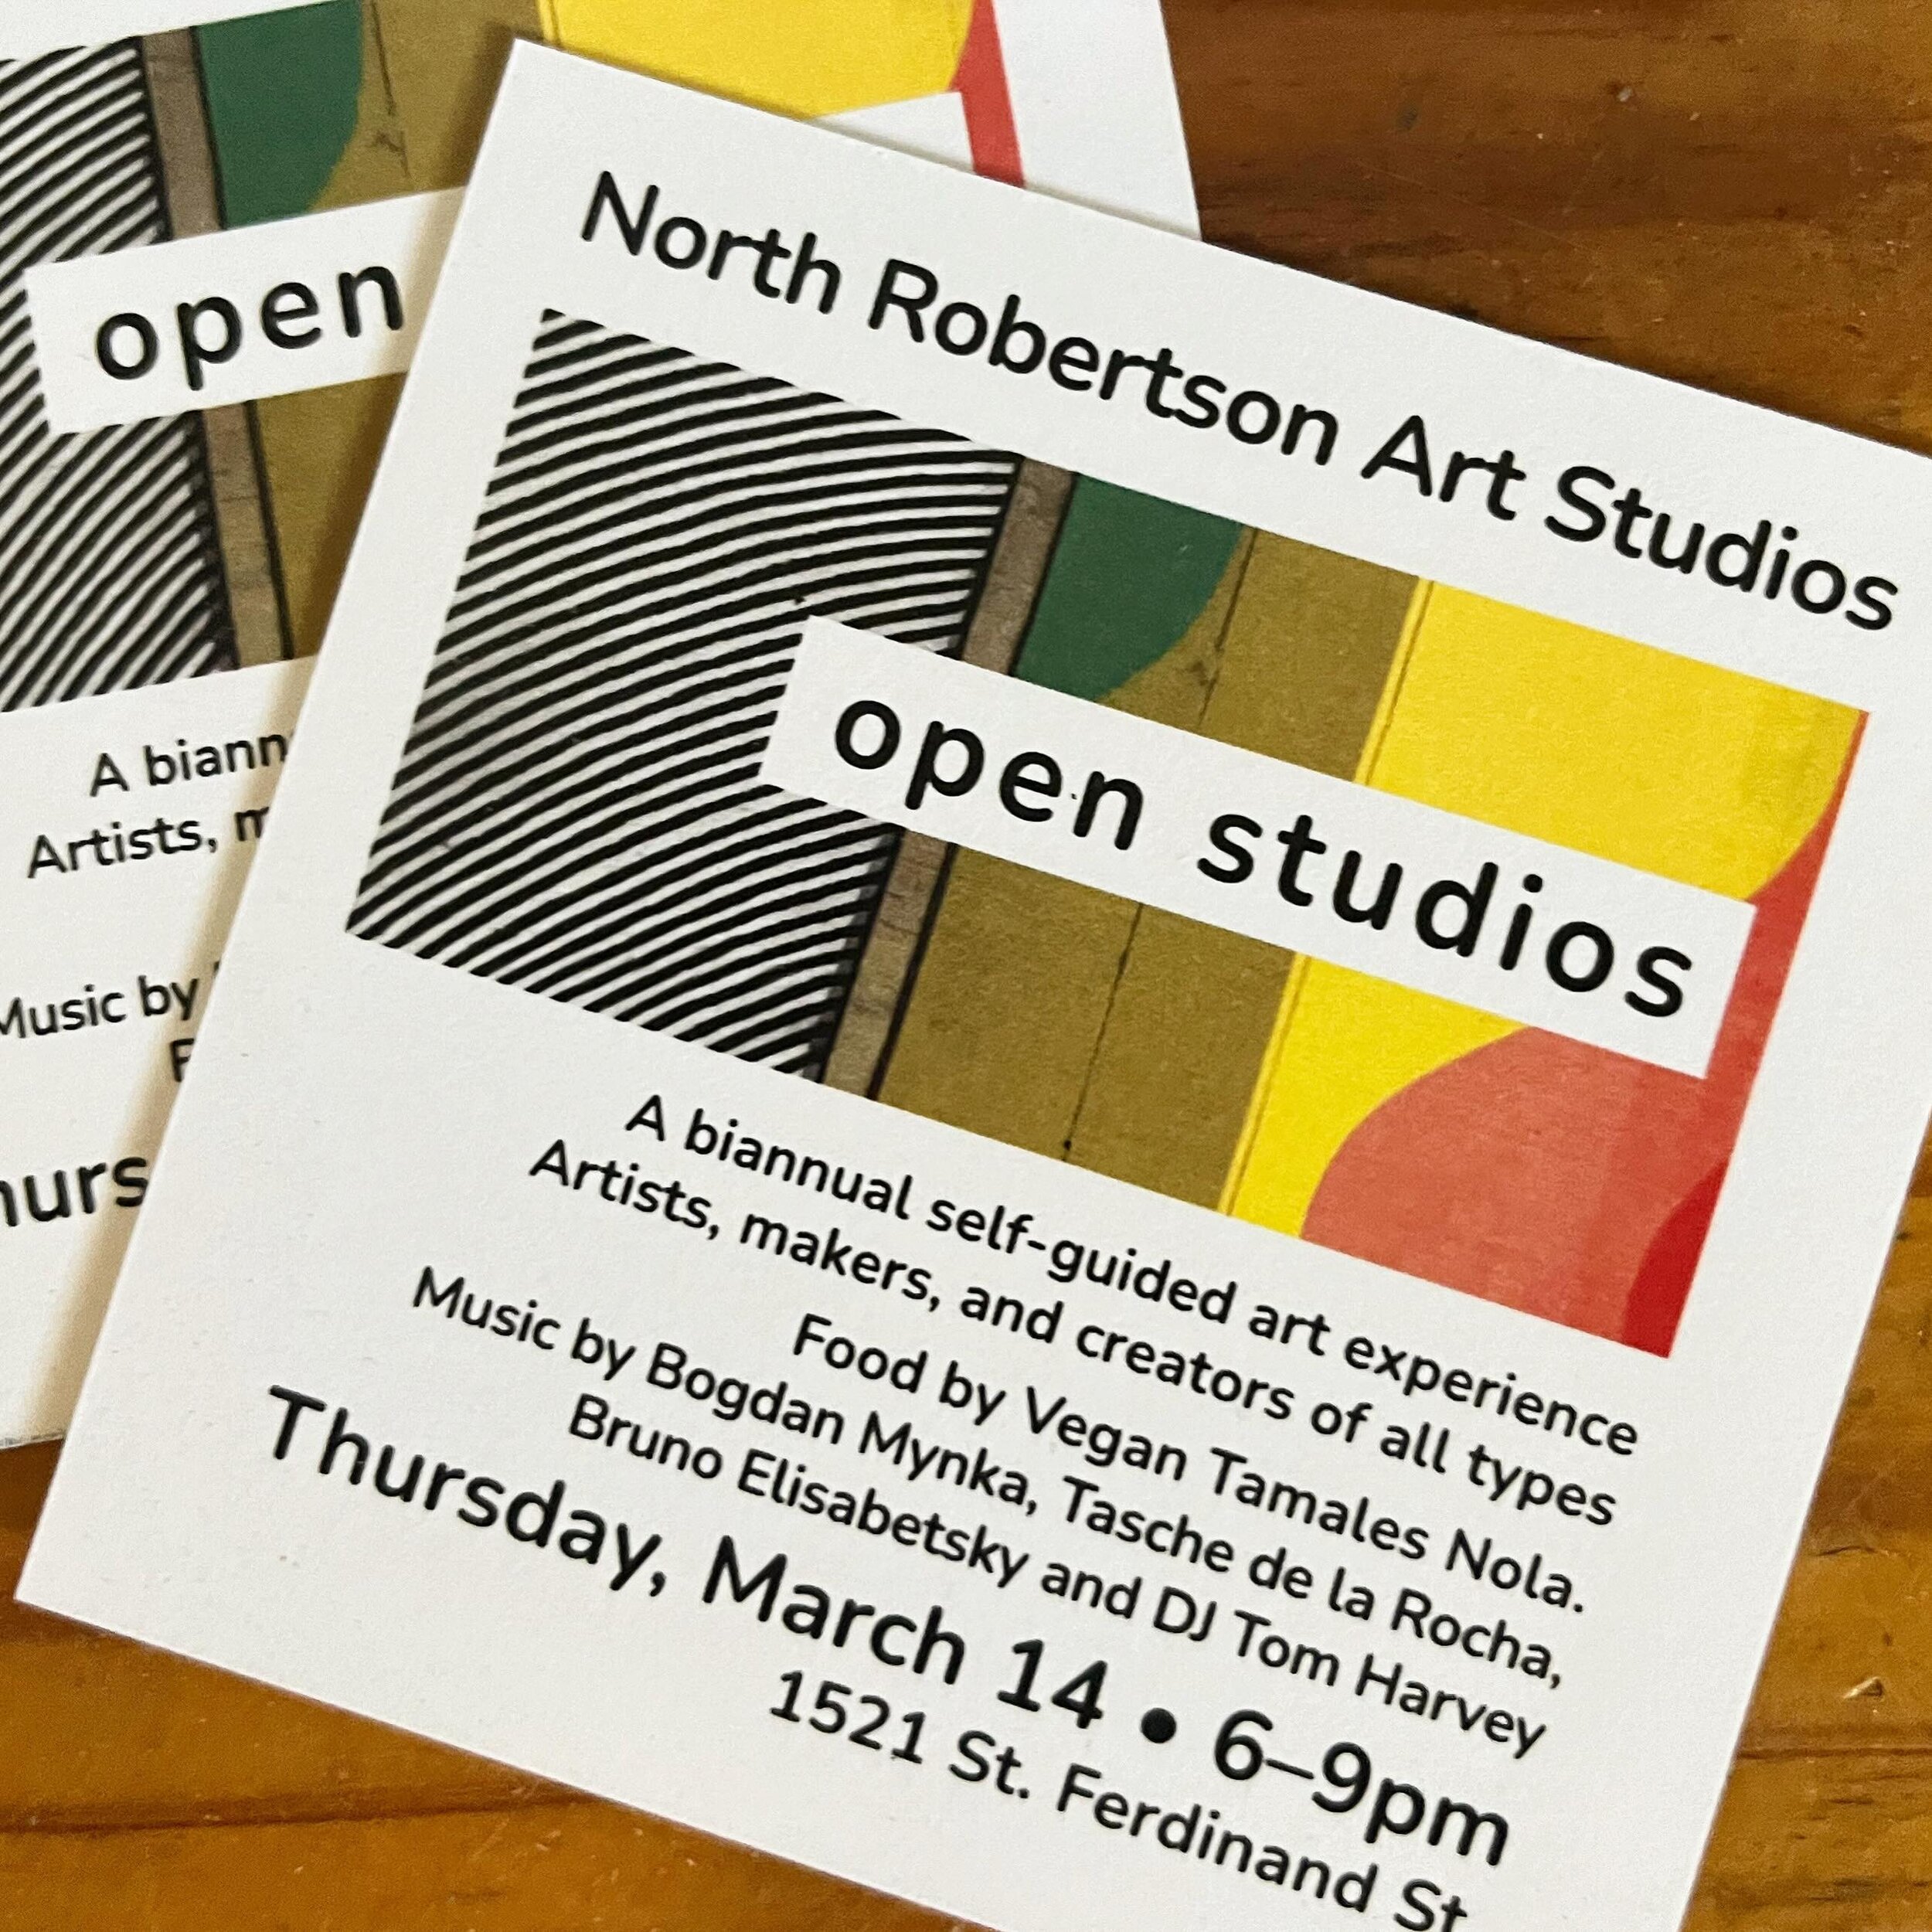 Come see me and my studio mates tomorrow, Thurs. 3/14, 6-9pm at 1521 St Ferdinand. We&rsquo;ll be opening our doors, hanging out, and there will be live music, food, and drink! We&rsquo;re in a large building with many other artists opening their doo